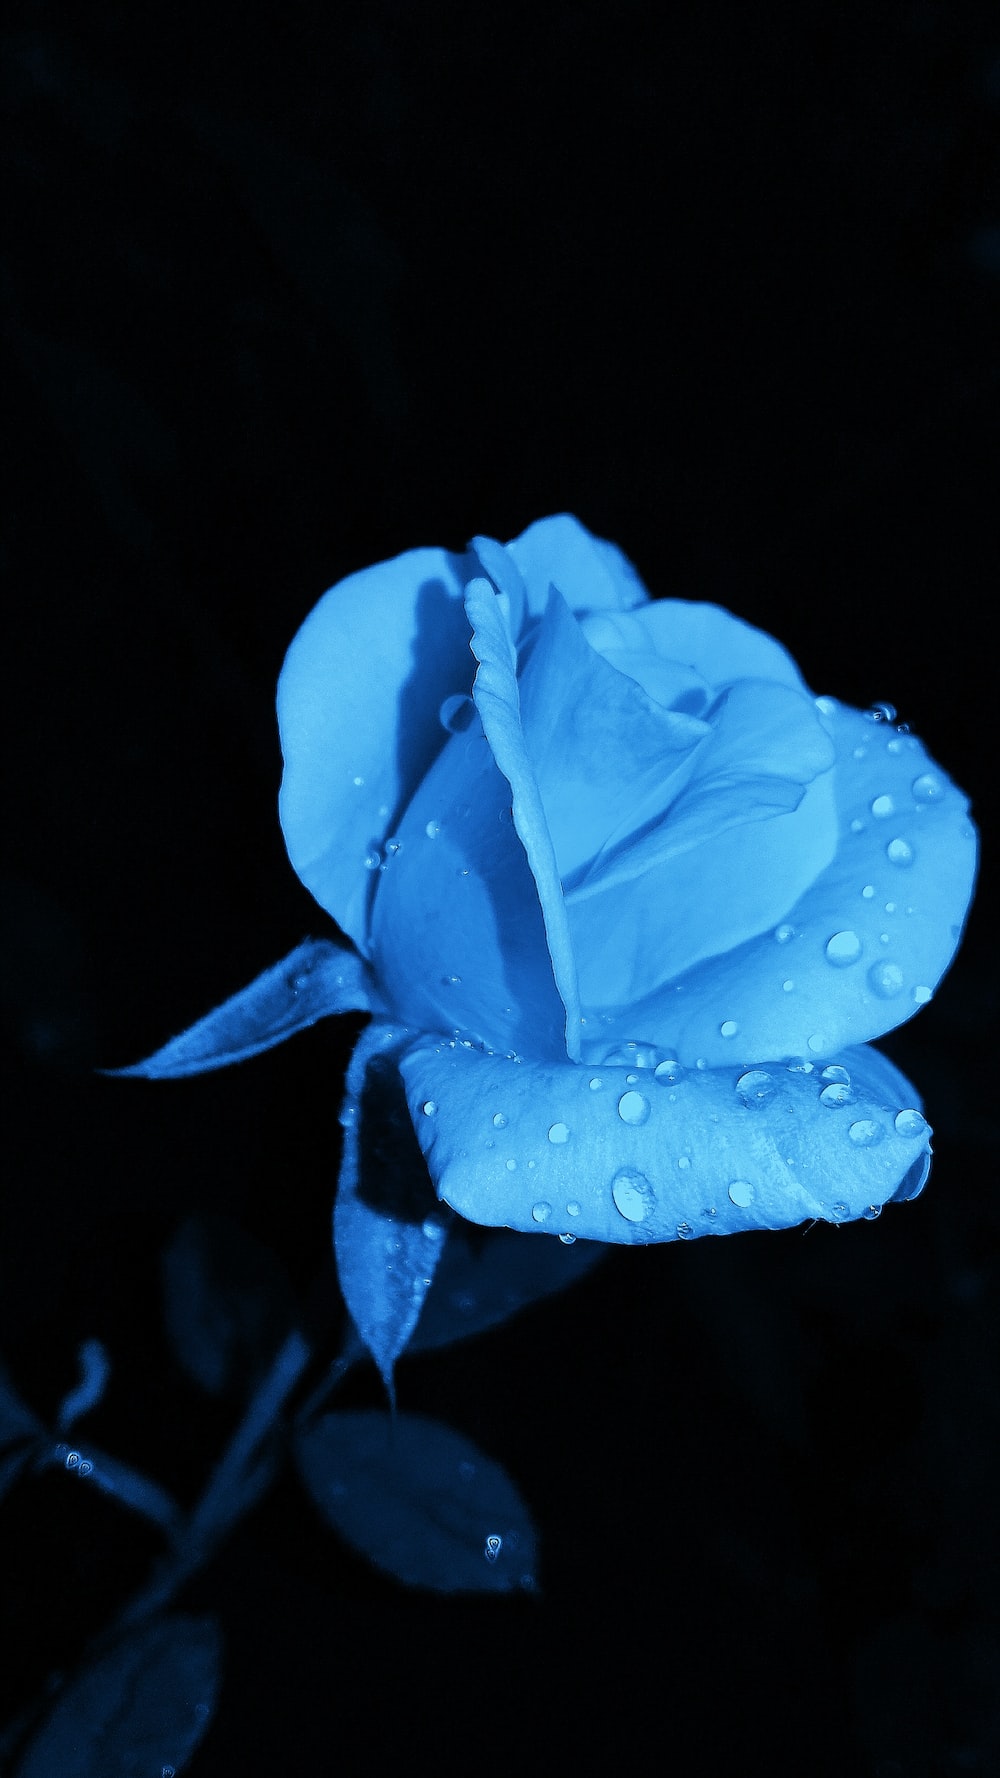 Blue Rose Picture. Download Free Image